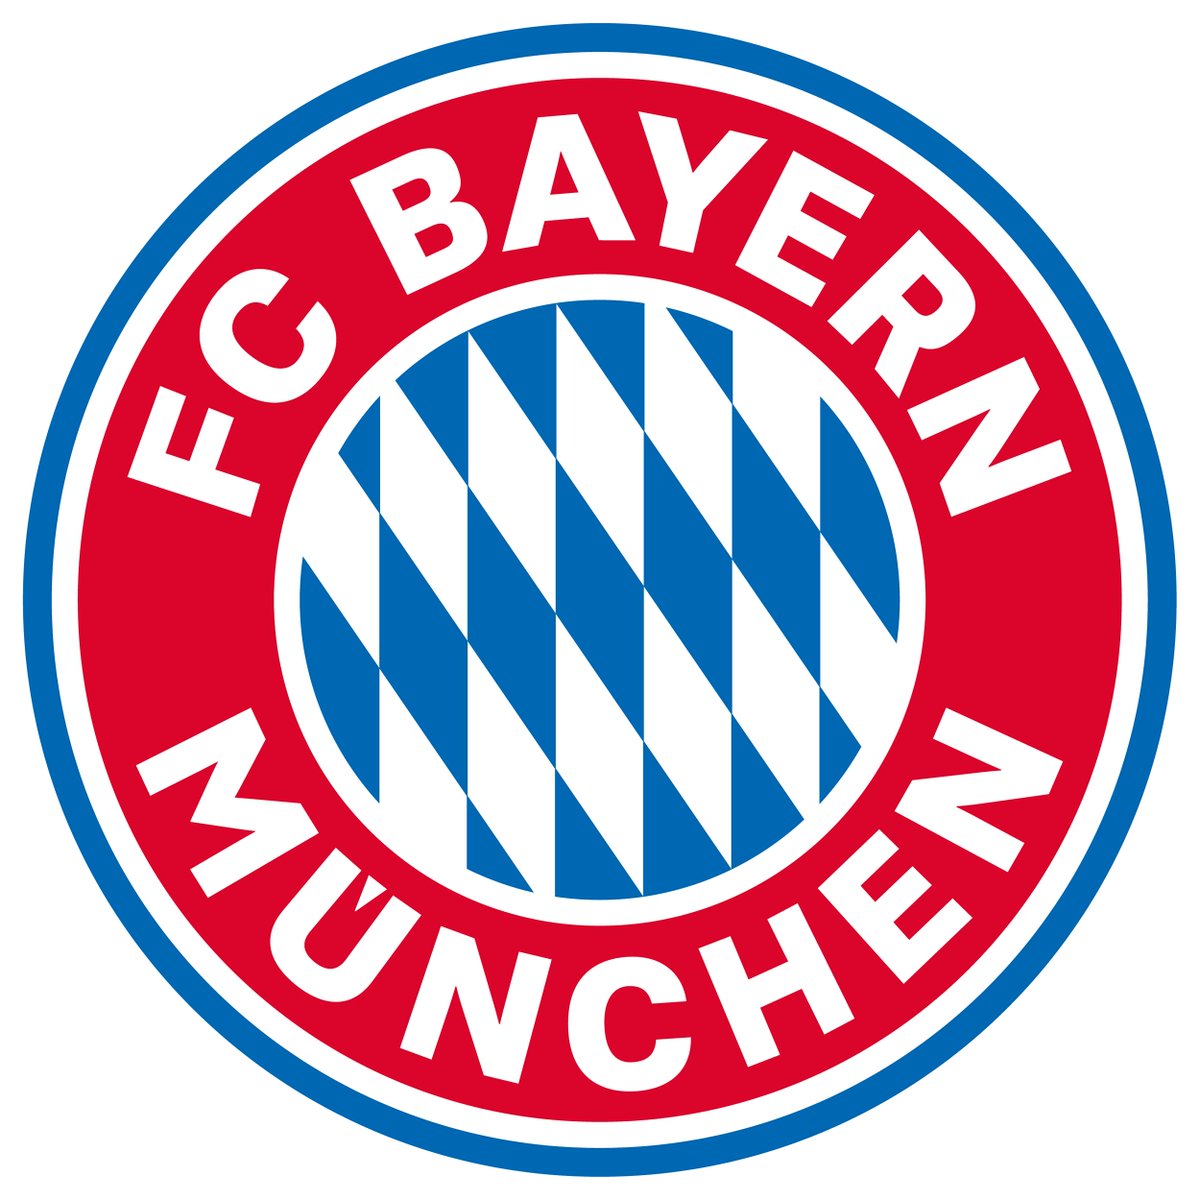 During all this ESL this bullshit, it reminds me why I should always be grateful for my club. We've seen top clubs sell out their fans while our board even during the era of FC Hollywood, remained calm and cleared for us to continue to dream. How I became miasanmia [A thread]